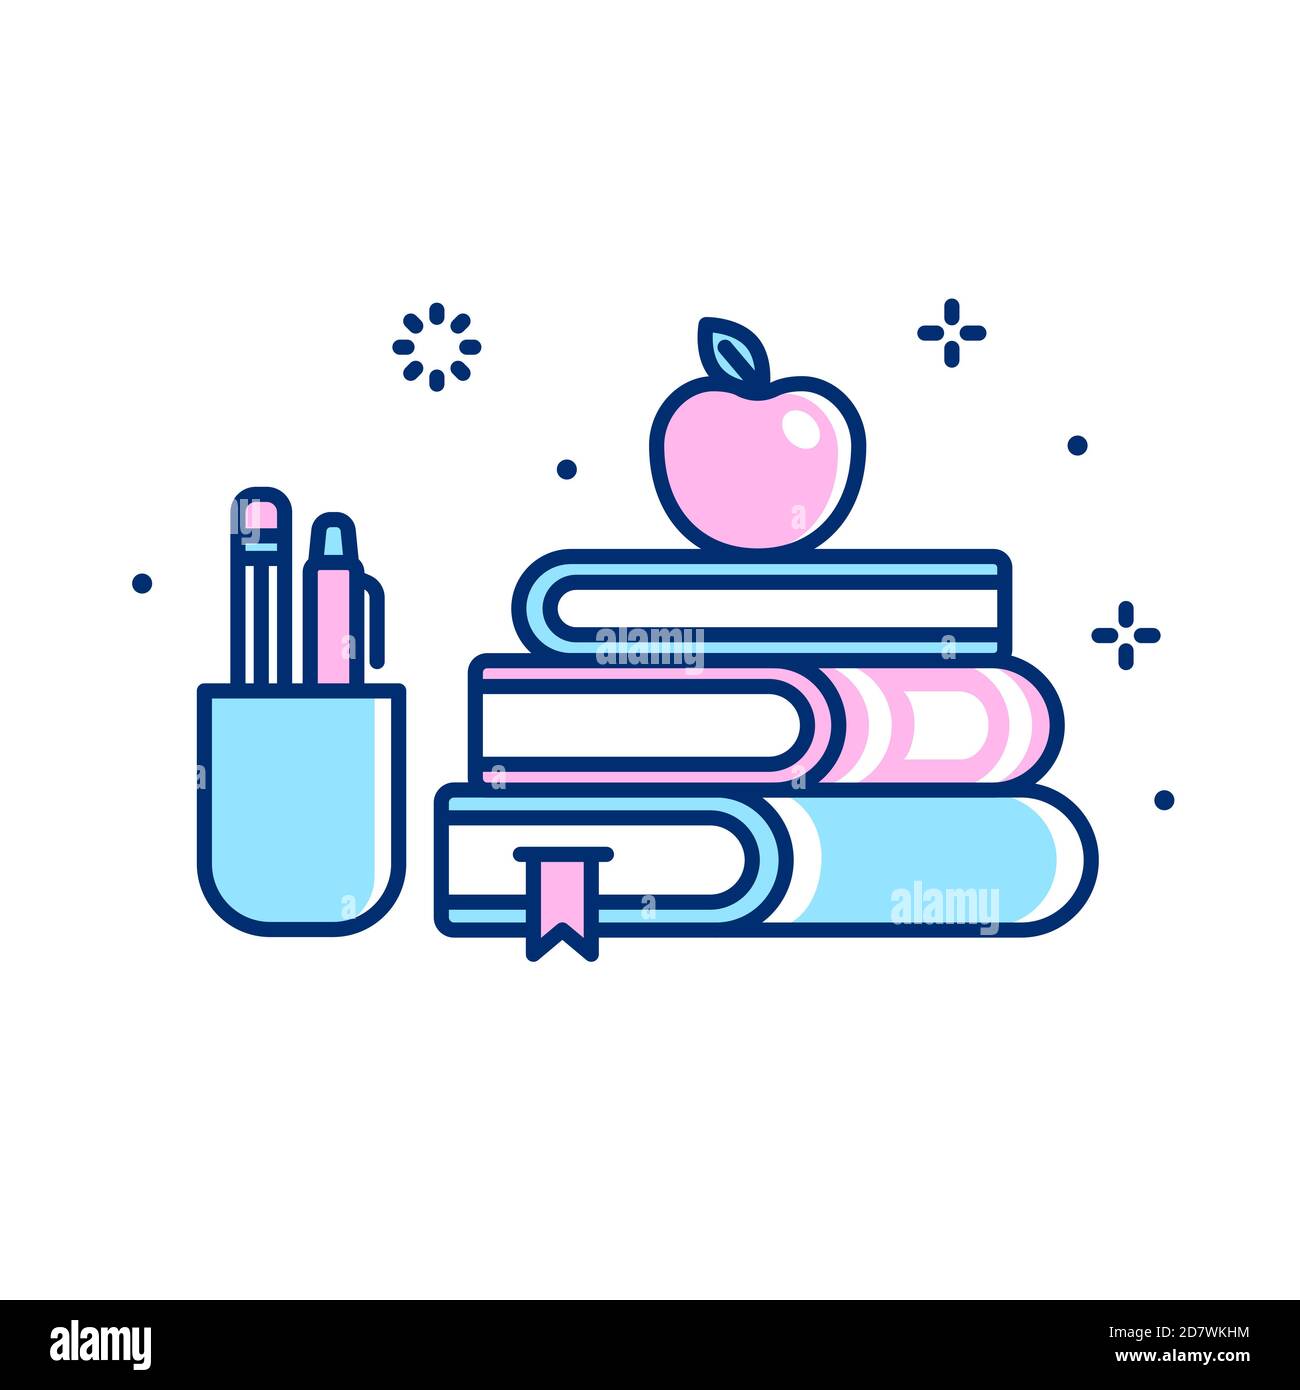 Cartoon school supplies illustration. Stack of books, apple and pens. Back to school symbol. Simple flat line icon. Stock Vector